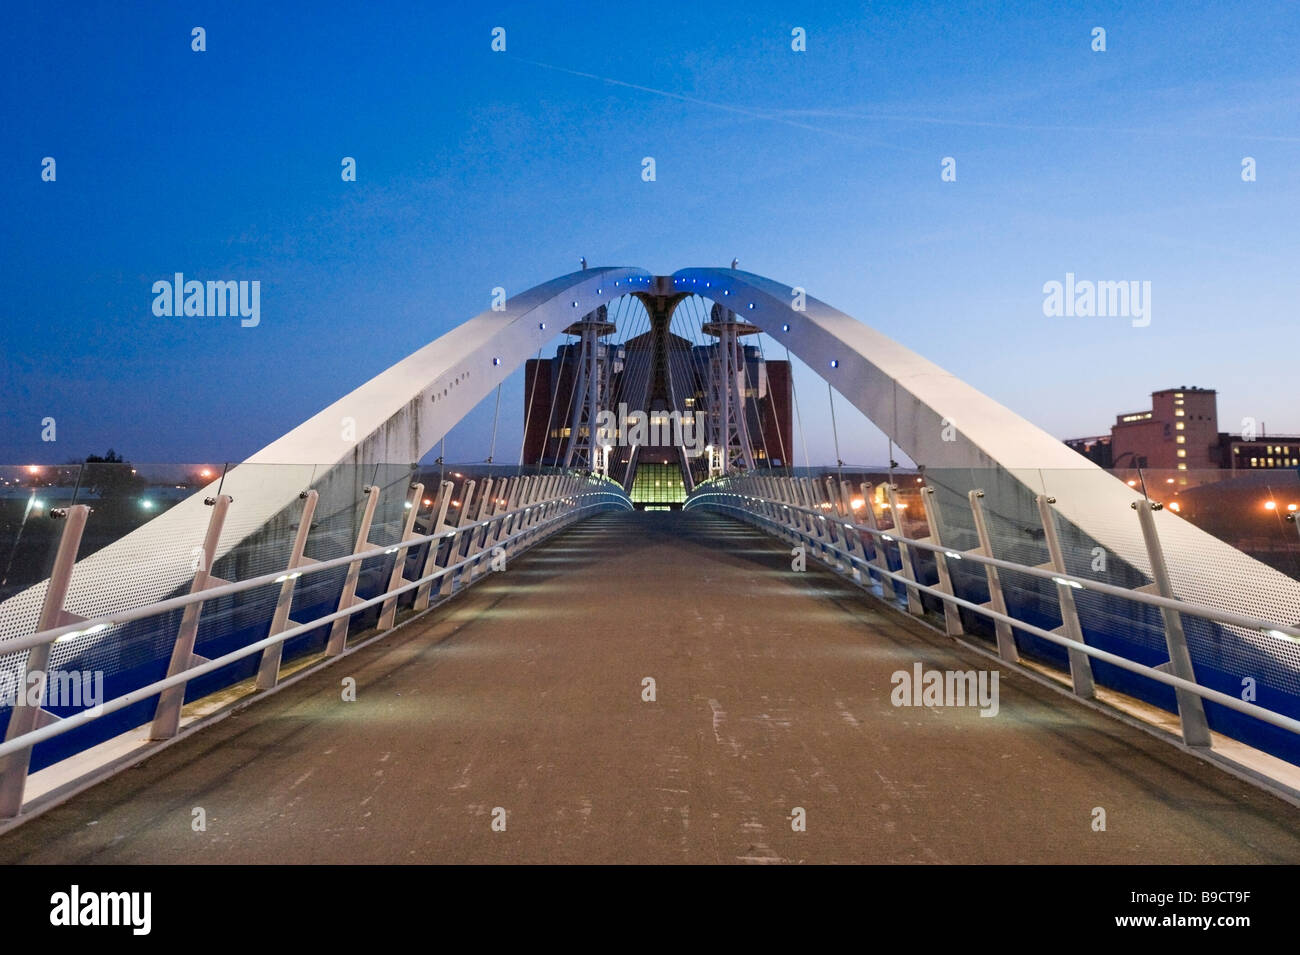 The Millennium lifting footbridge over the Manchester Ship Canal at night, Salford Quays, Greater Manchester, England Stock Photo